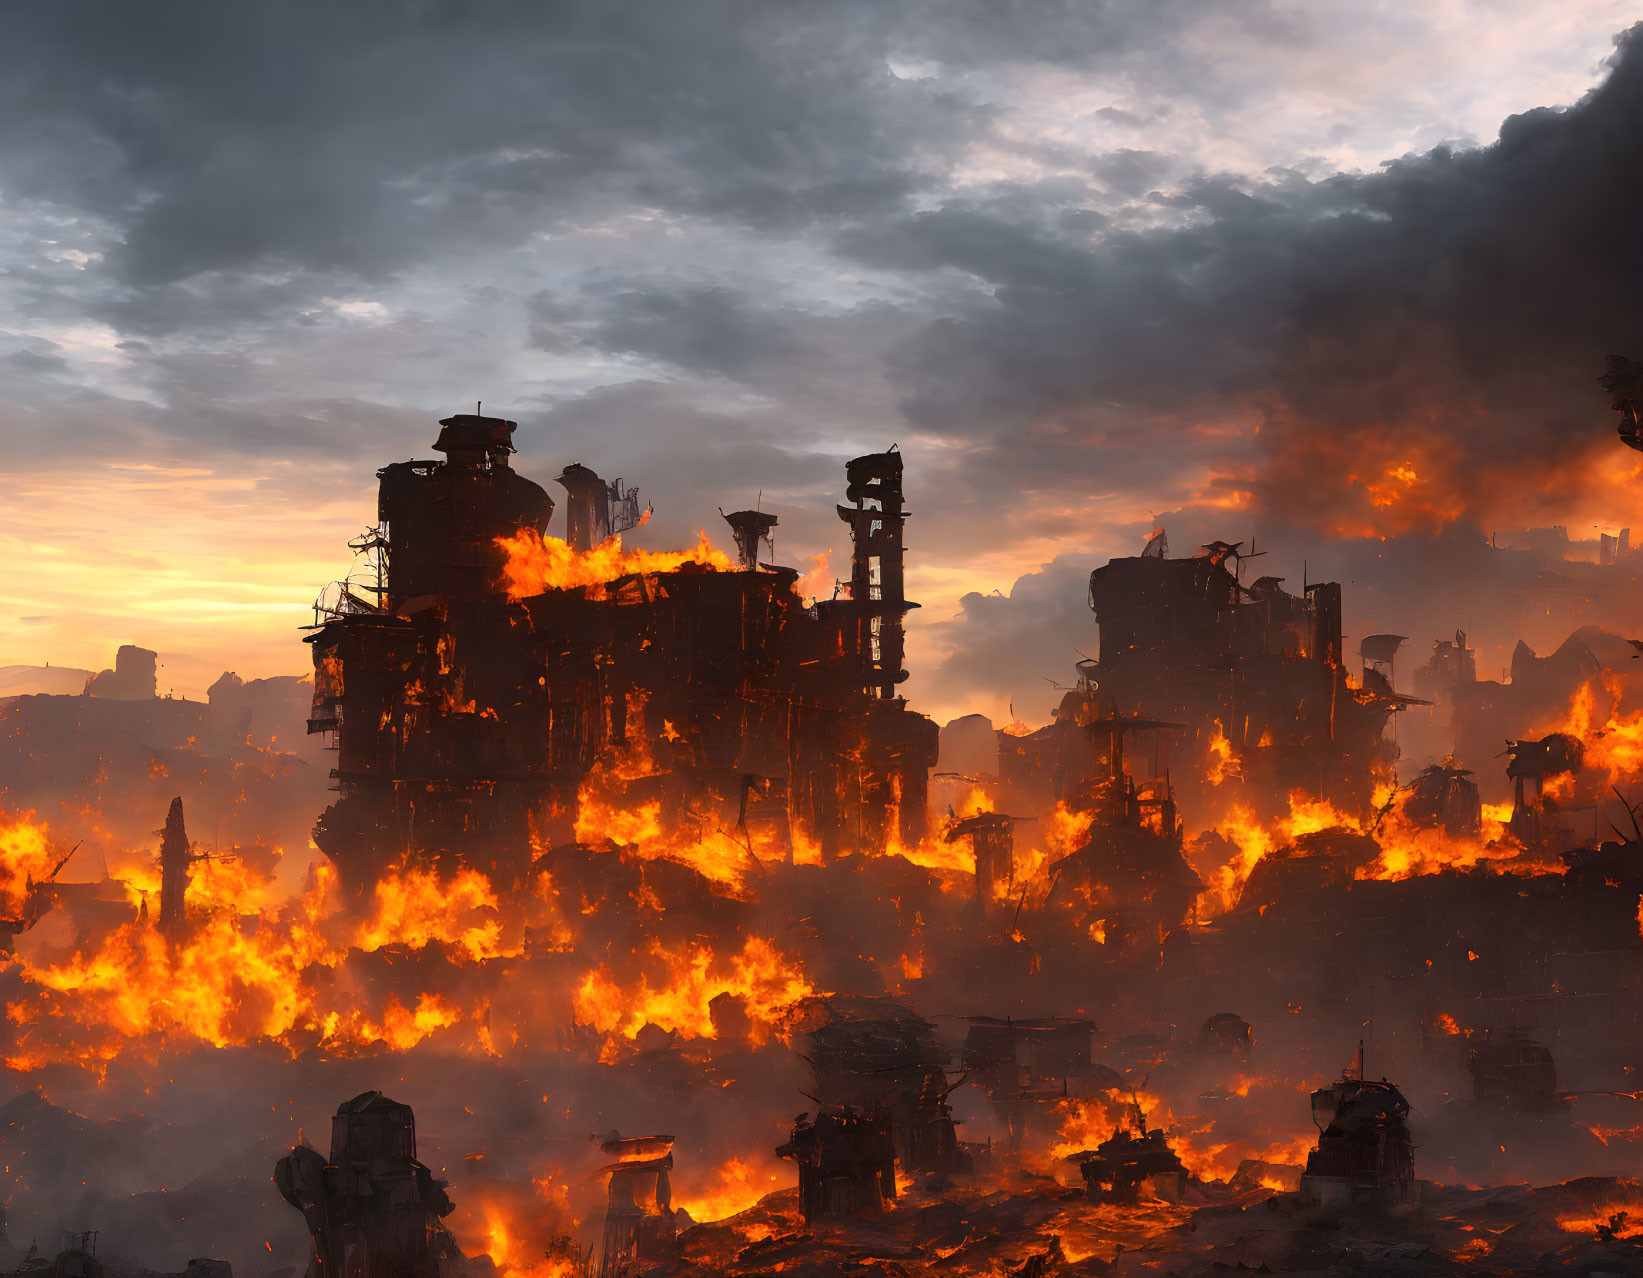 Dystopian landscape with towering structures engulfed in flames